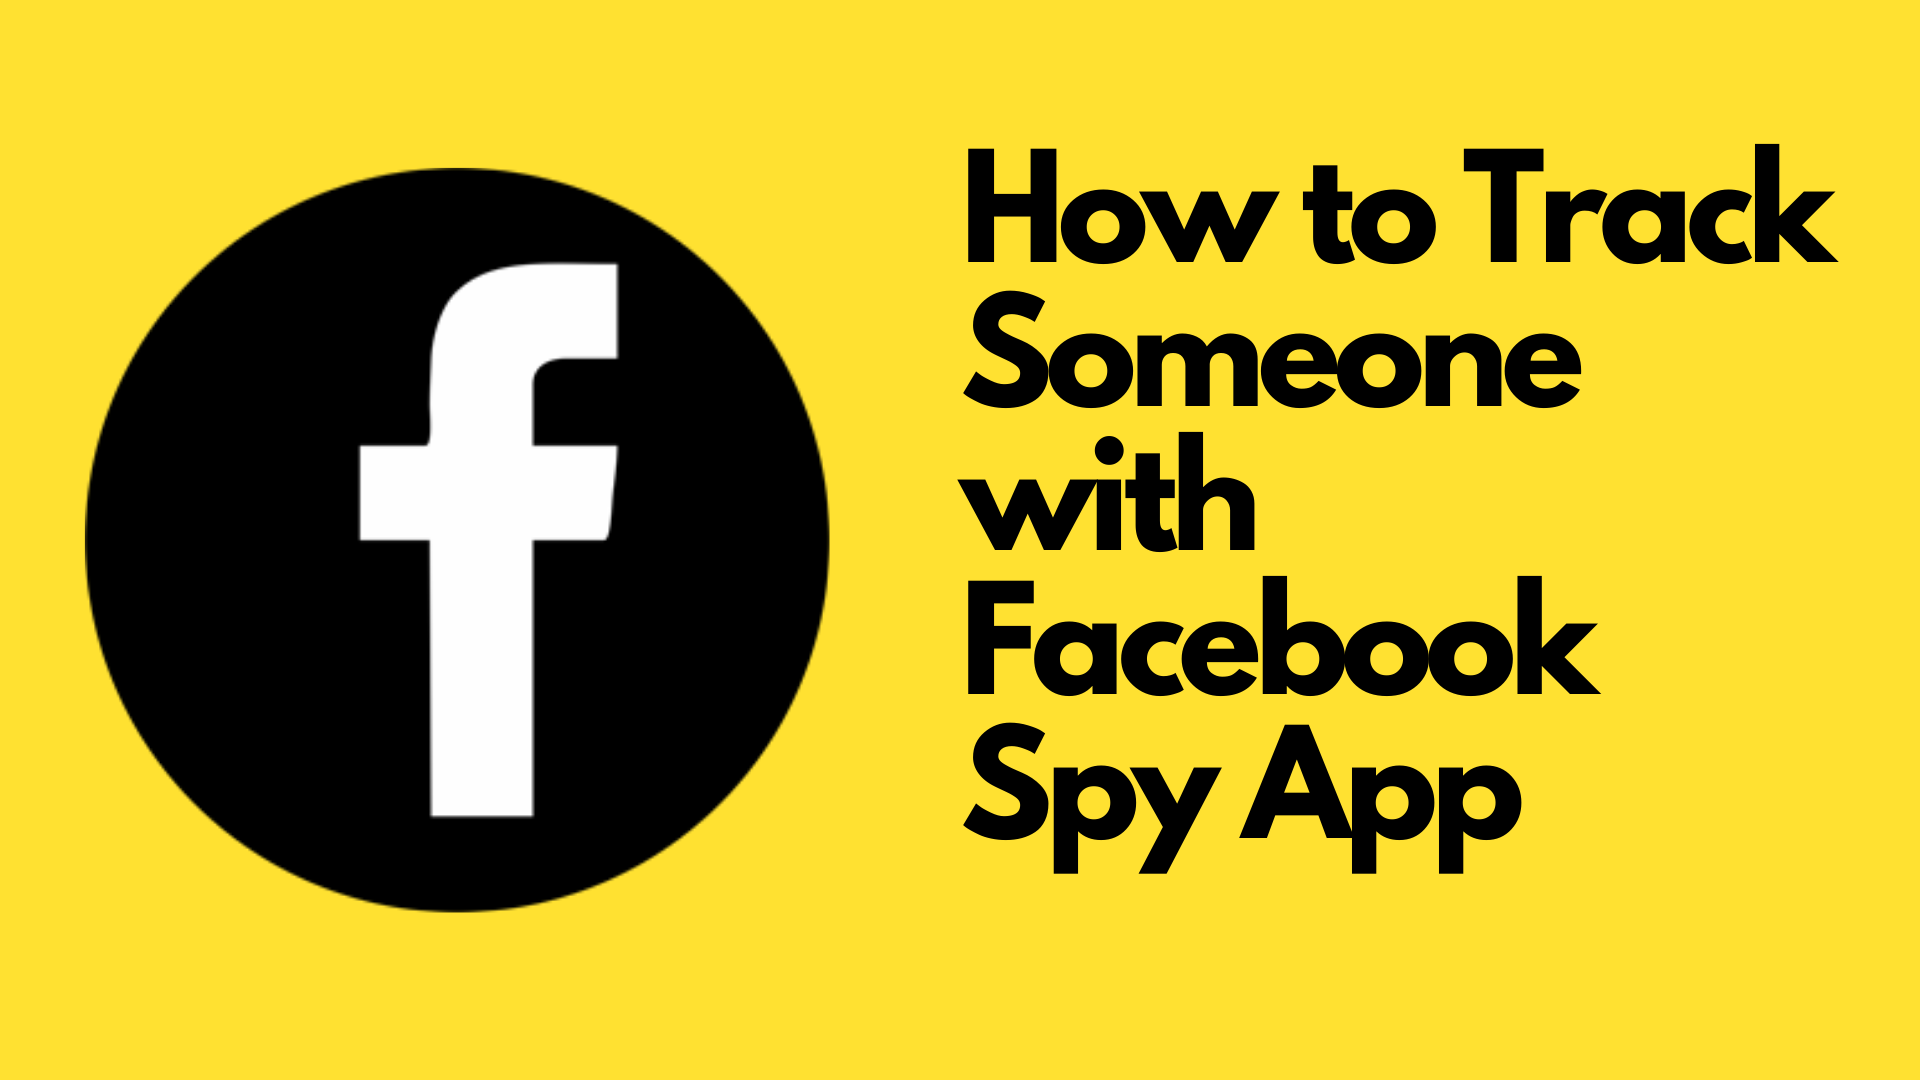 How to Track Someone on Facebook with a Facebook Spy App